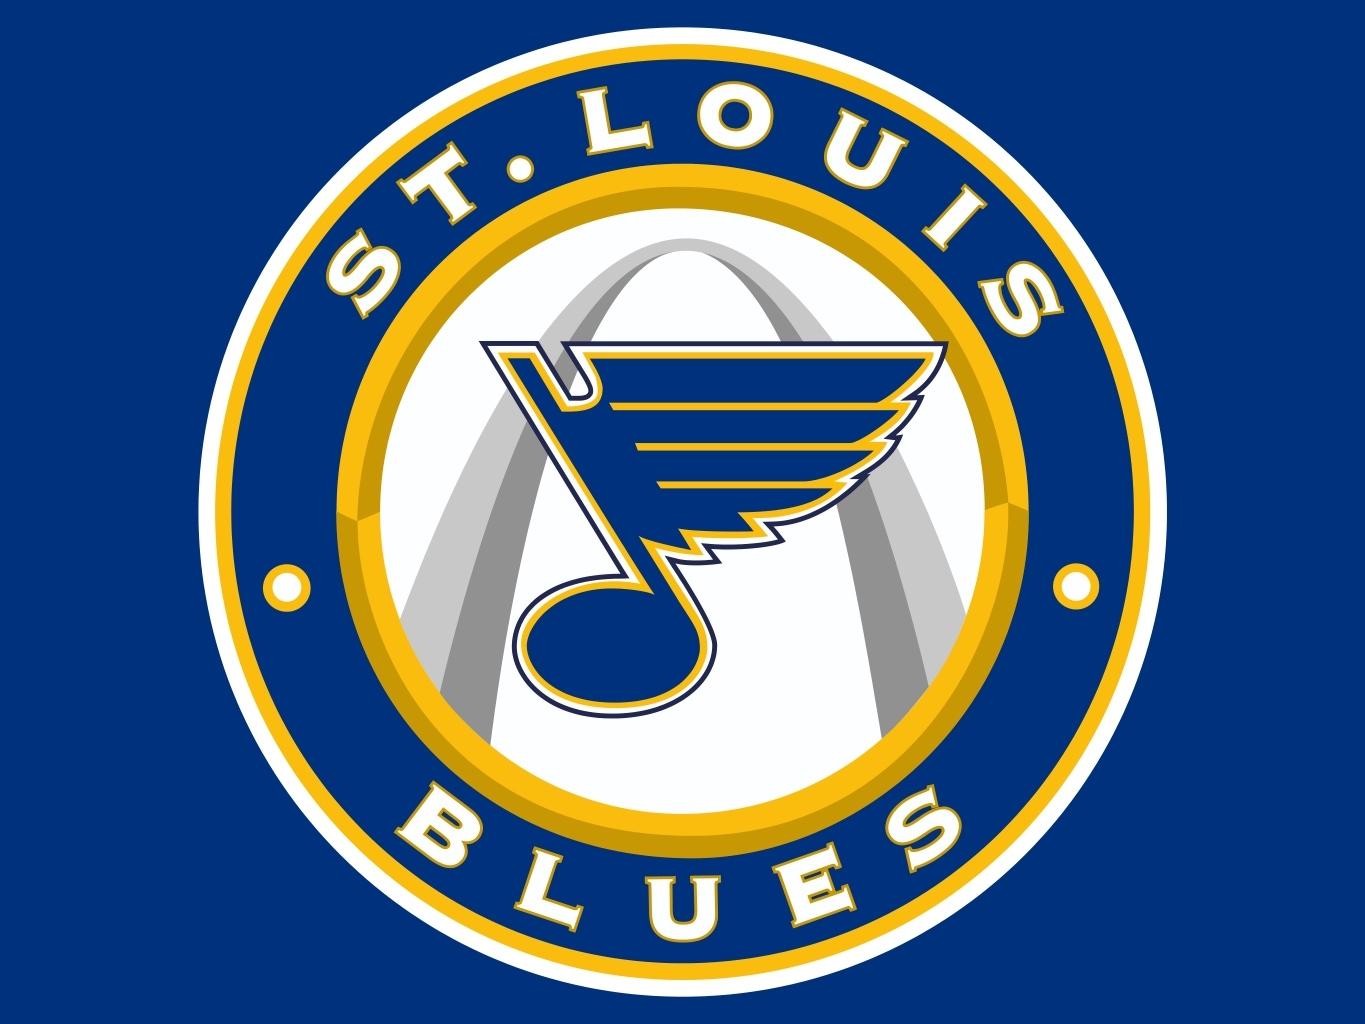 St. louis Blues Wallpaper and Background Imagex1024